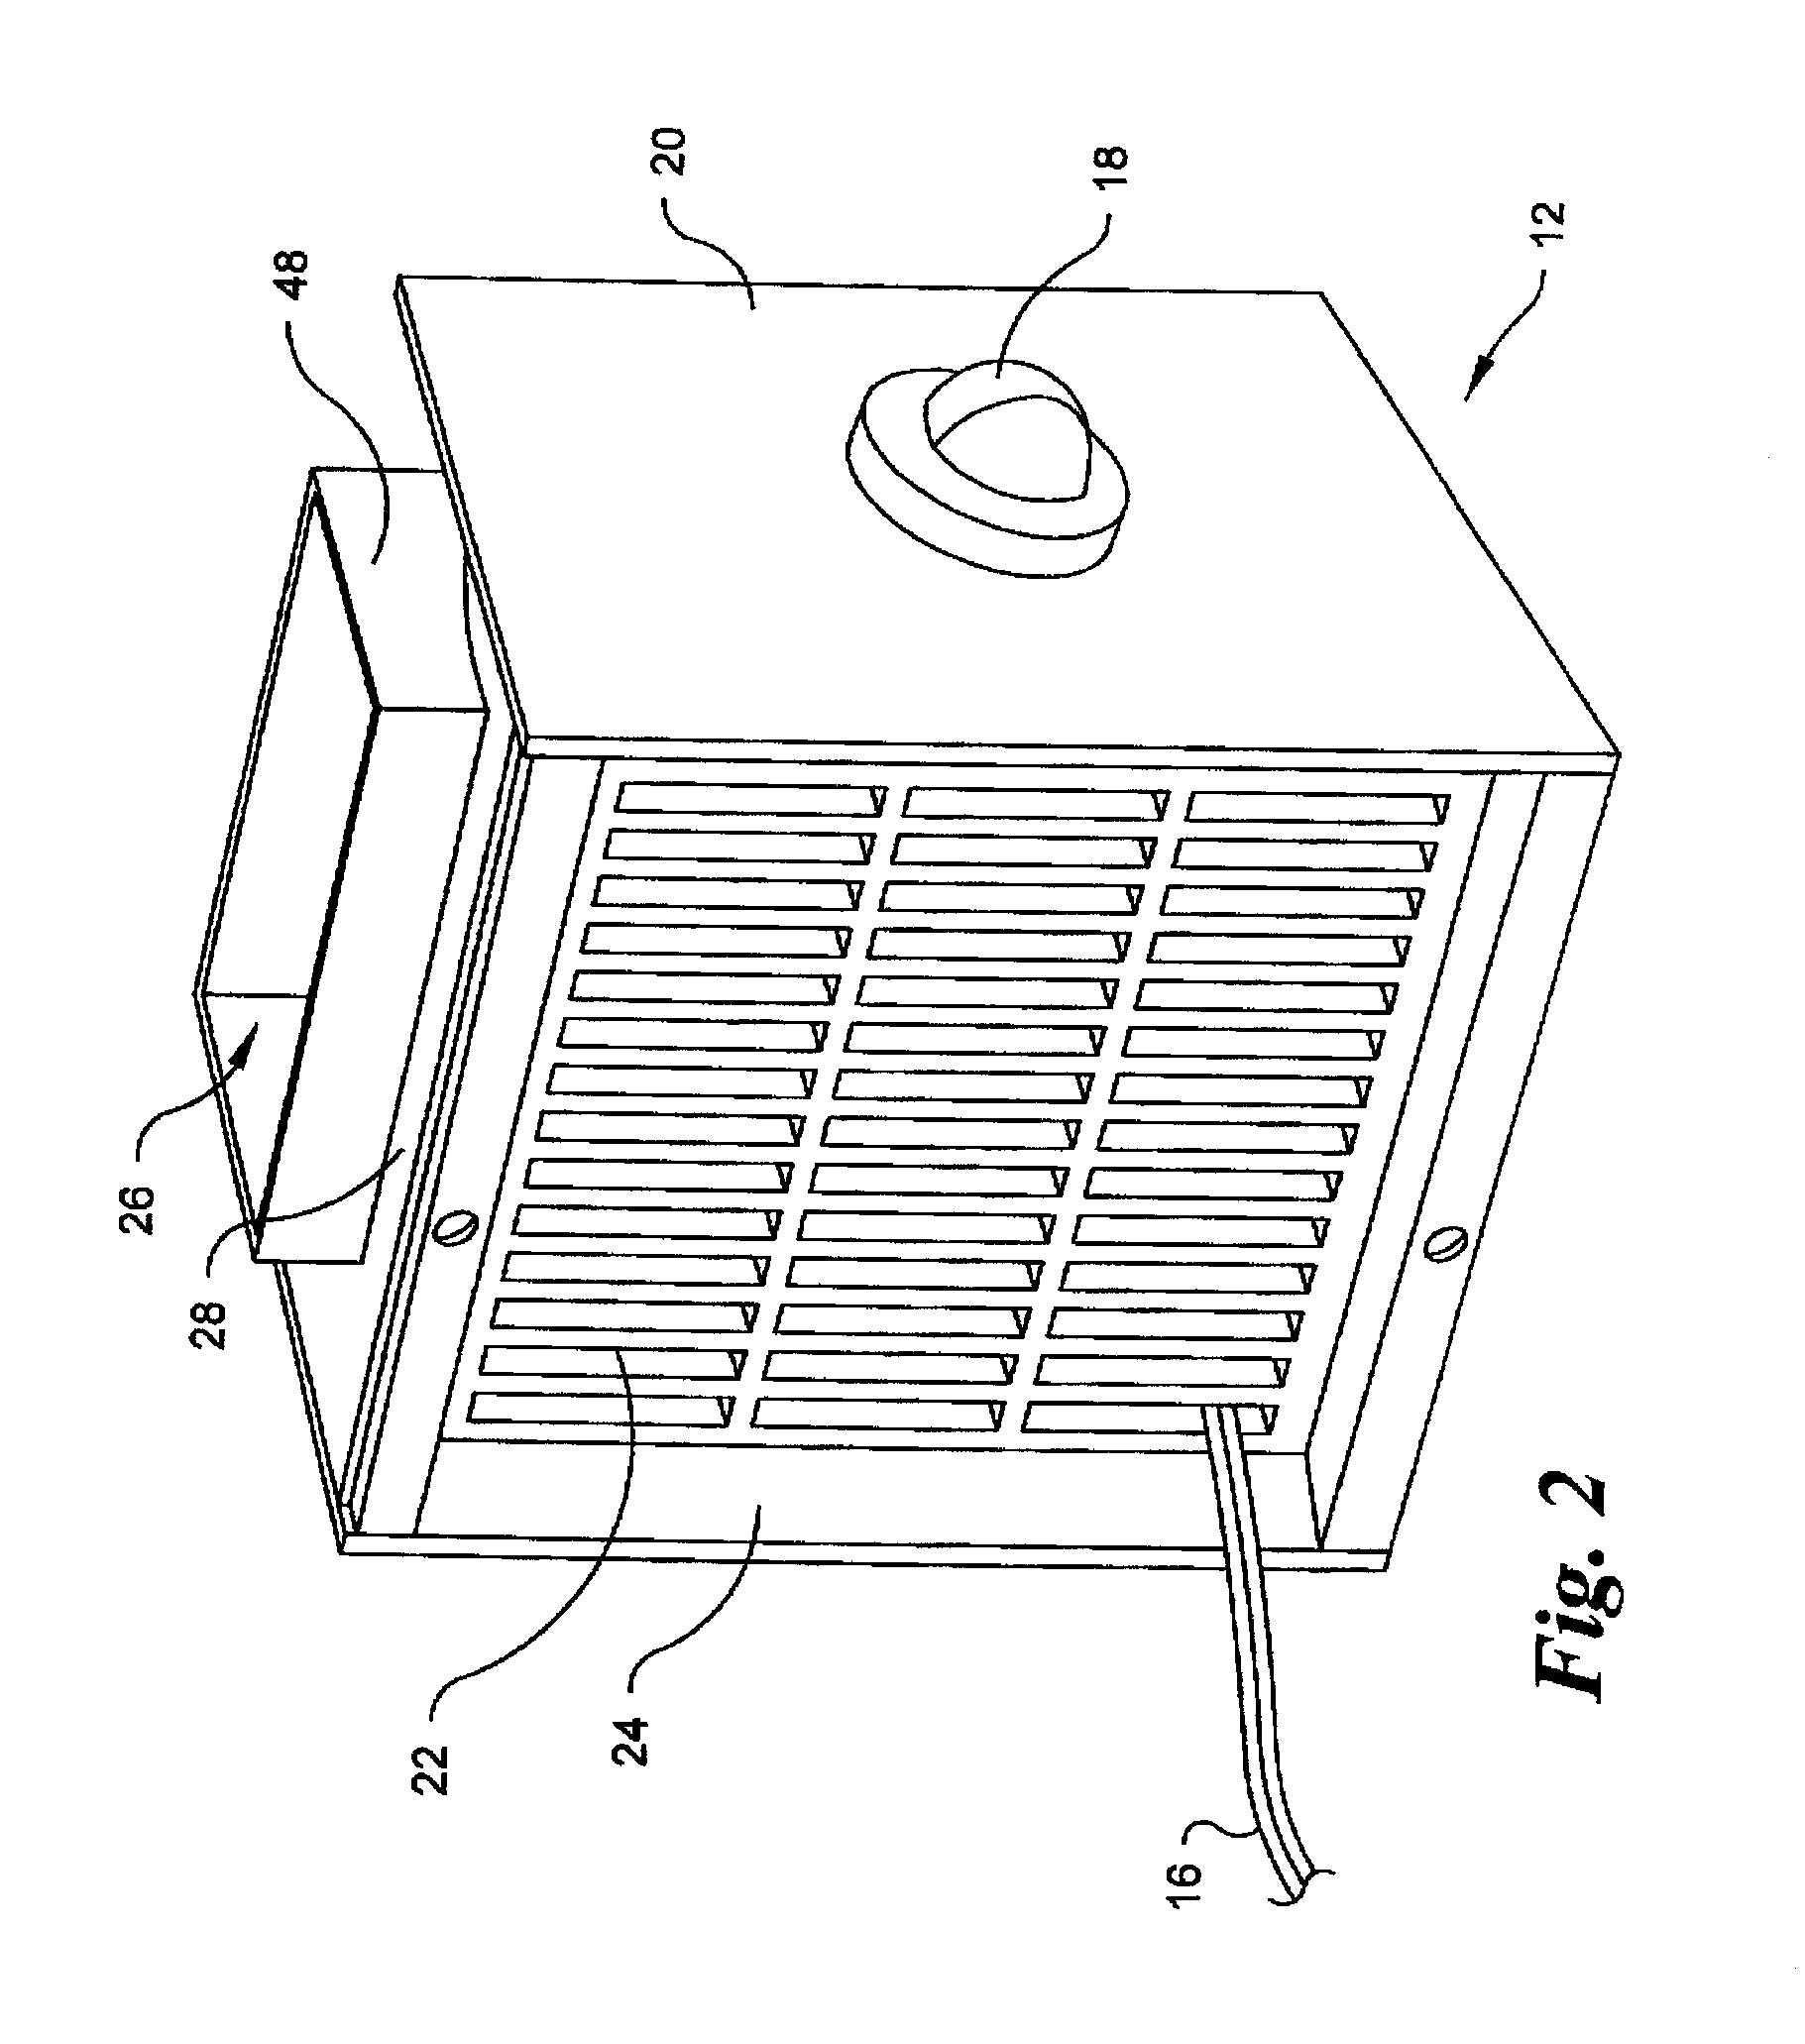 Air purifier for removing particles or contaminants from air